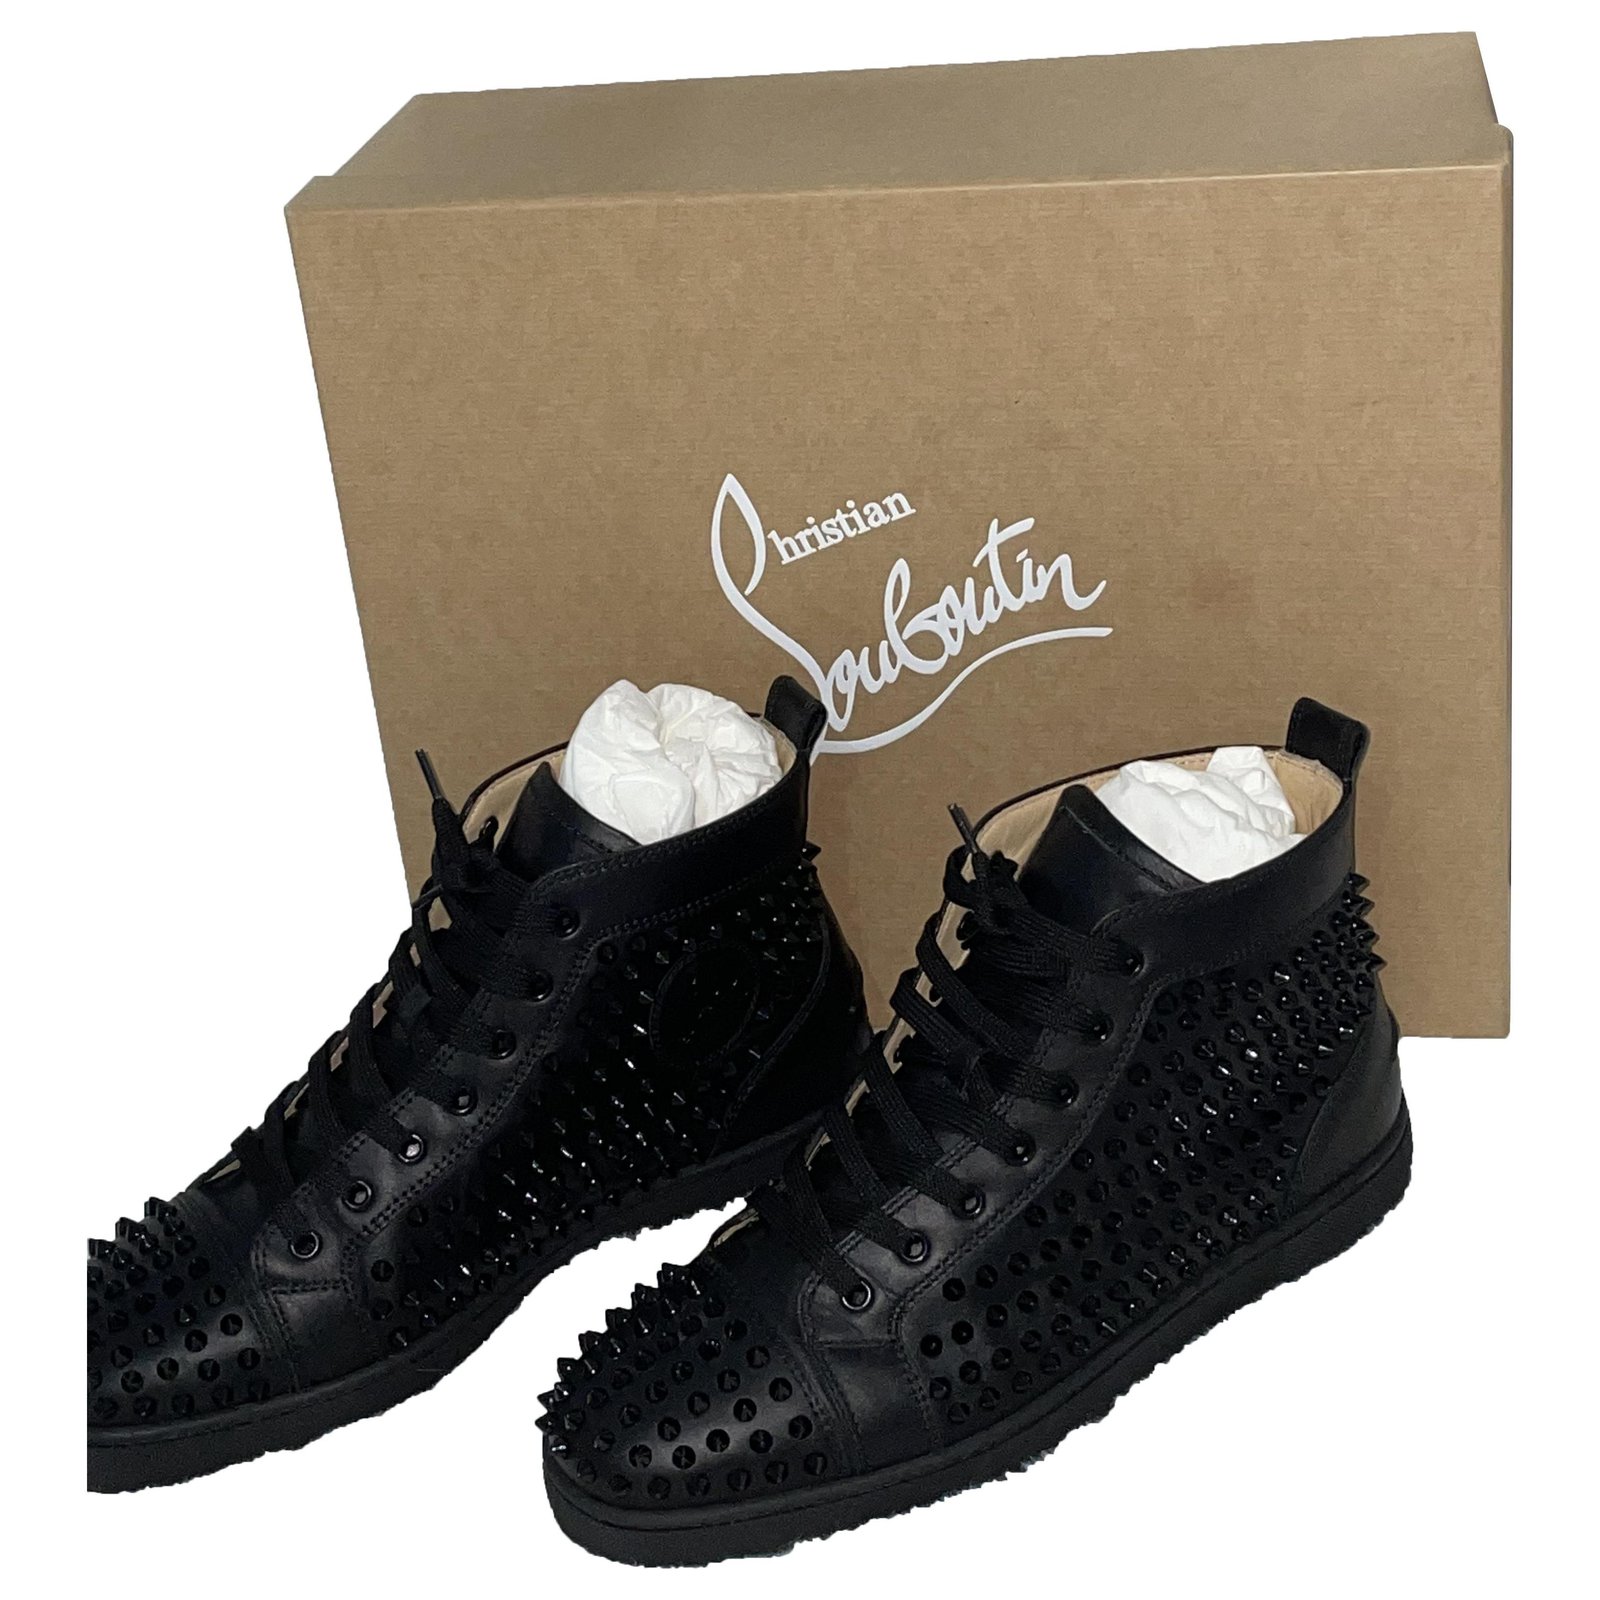 Christian Louboutin Louis Spikes Black Leather Sneakers New